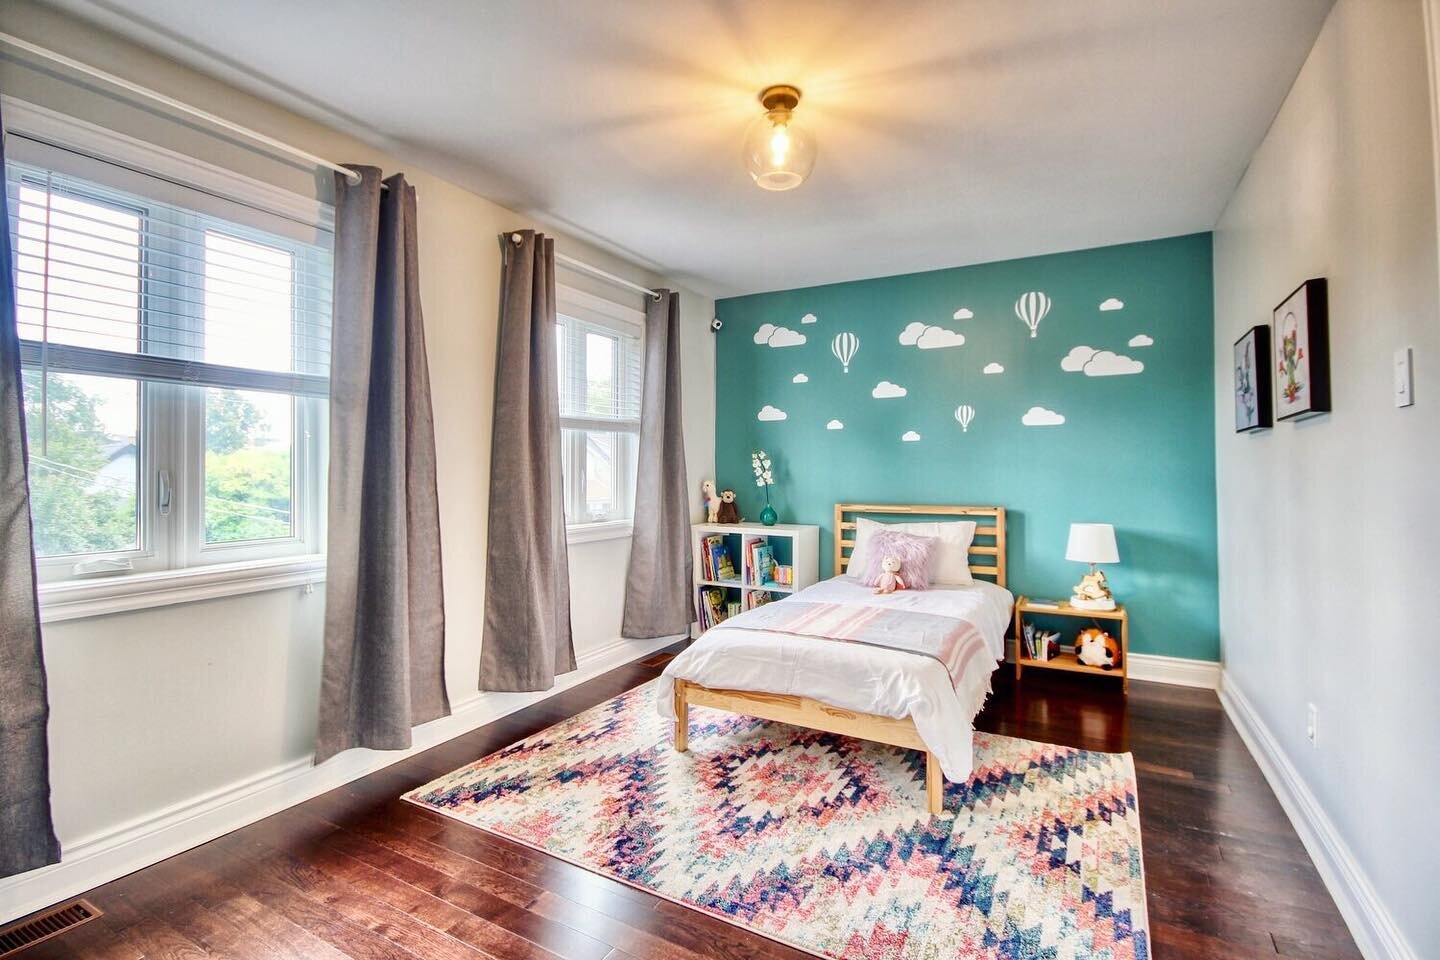 We talk redecorating rentals on our blog, like what about those bold accent walls? Read about it now! Link in the bio 
.
.
.
#realestate #gtarealestate #toronto #torontorealestate #realestatetoronto #condo #torontohomes #torontolife #torontomls #toro